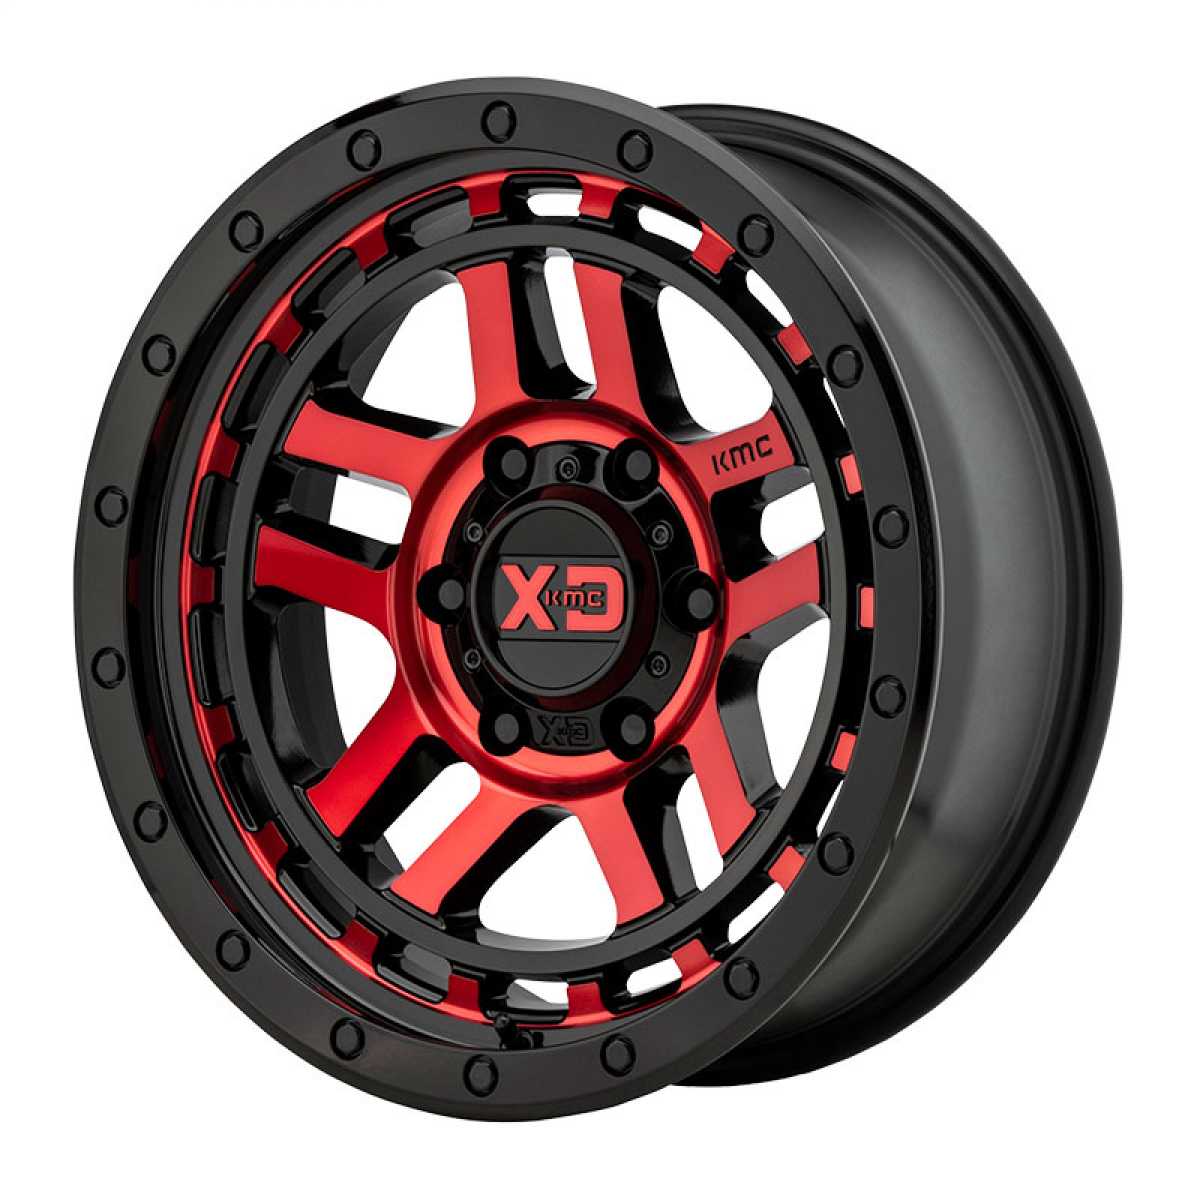 XD Series By KMC Recon